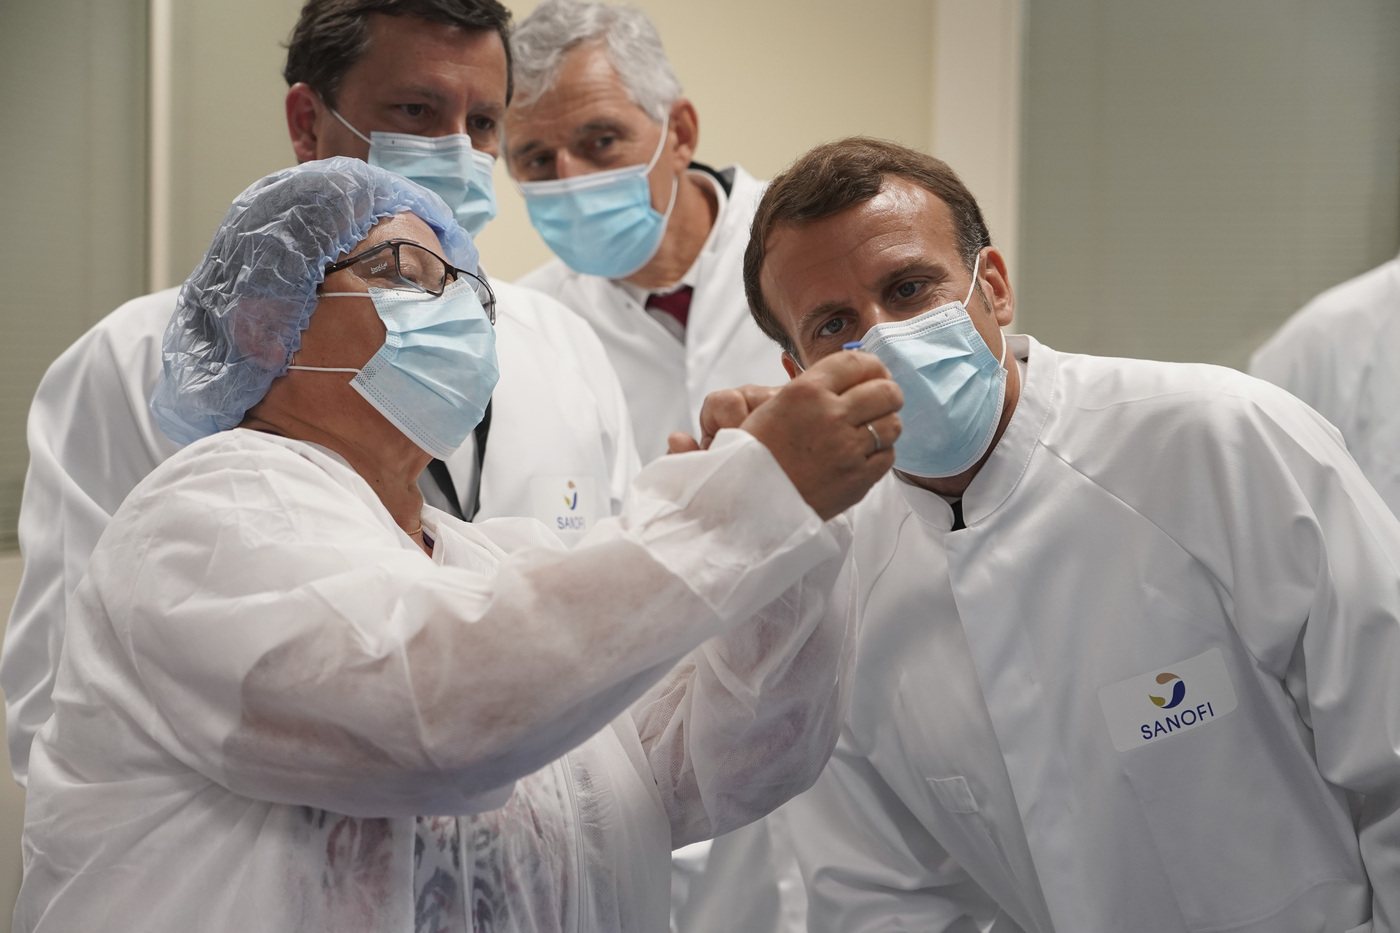 French President Emmanuel Macron visits an industrial development laboratory at French drugmaker's vaccine unit Sanofi Pasteur plant in Marcy-l'Etoile, near Lyon, central France, Tuesday, June 16, 2020.The visit comes after rival pharmaceutical company AstraZeneca this weekend announced a deal to supply 400 million vaccine doses to EU countries, including France. (AP Photo/Laurent Cipriani, Pool)